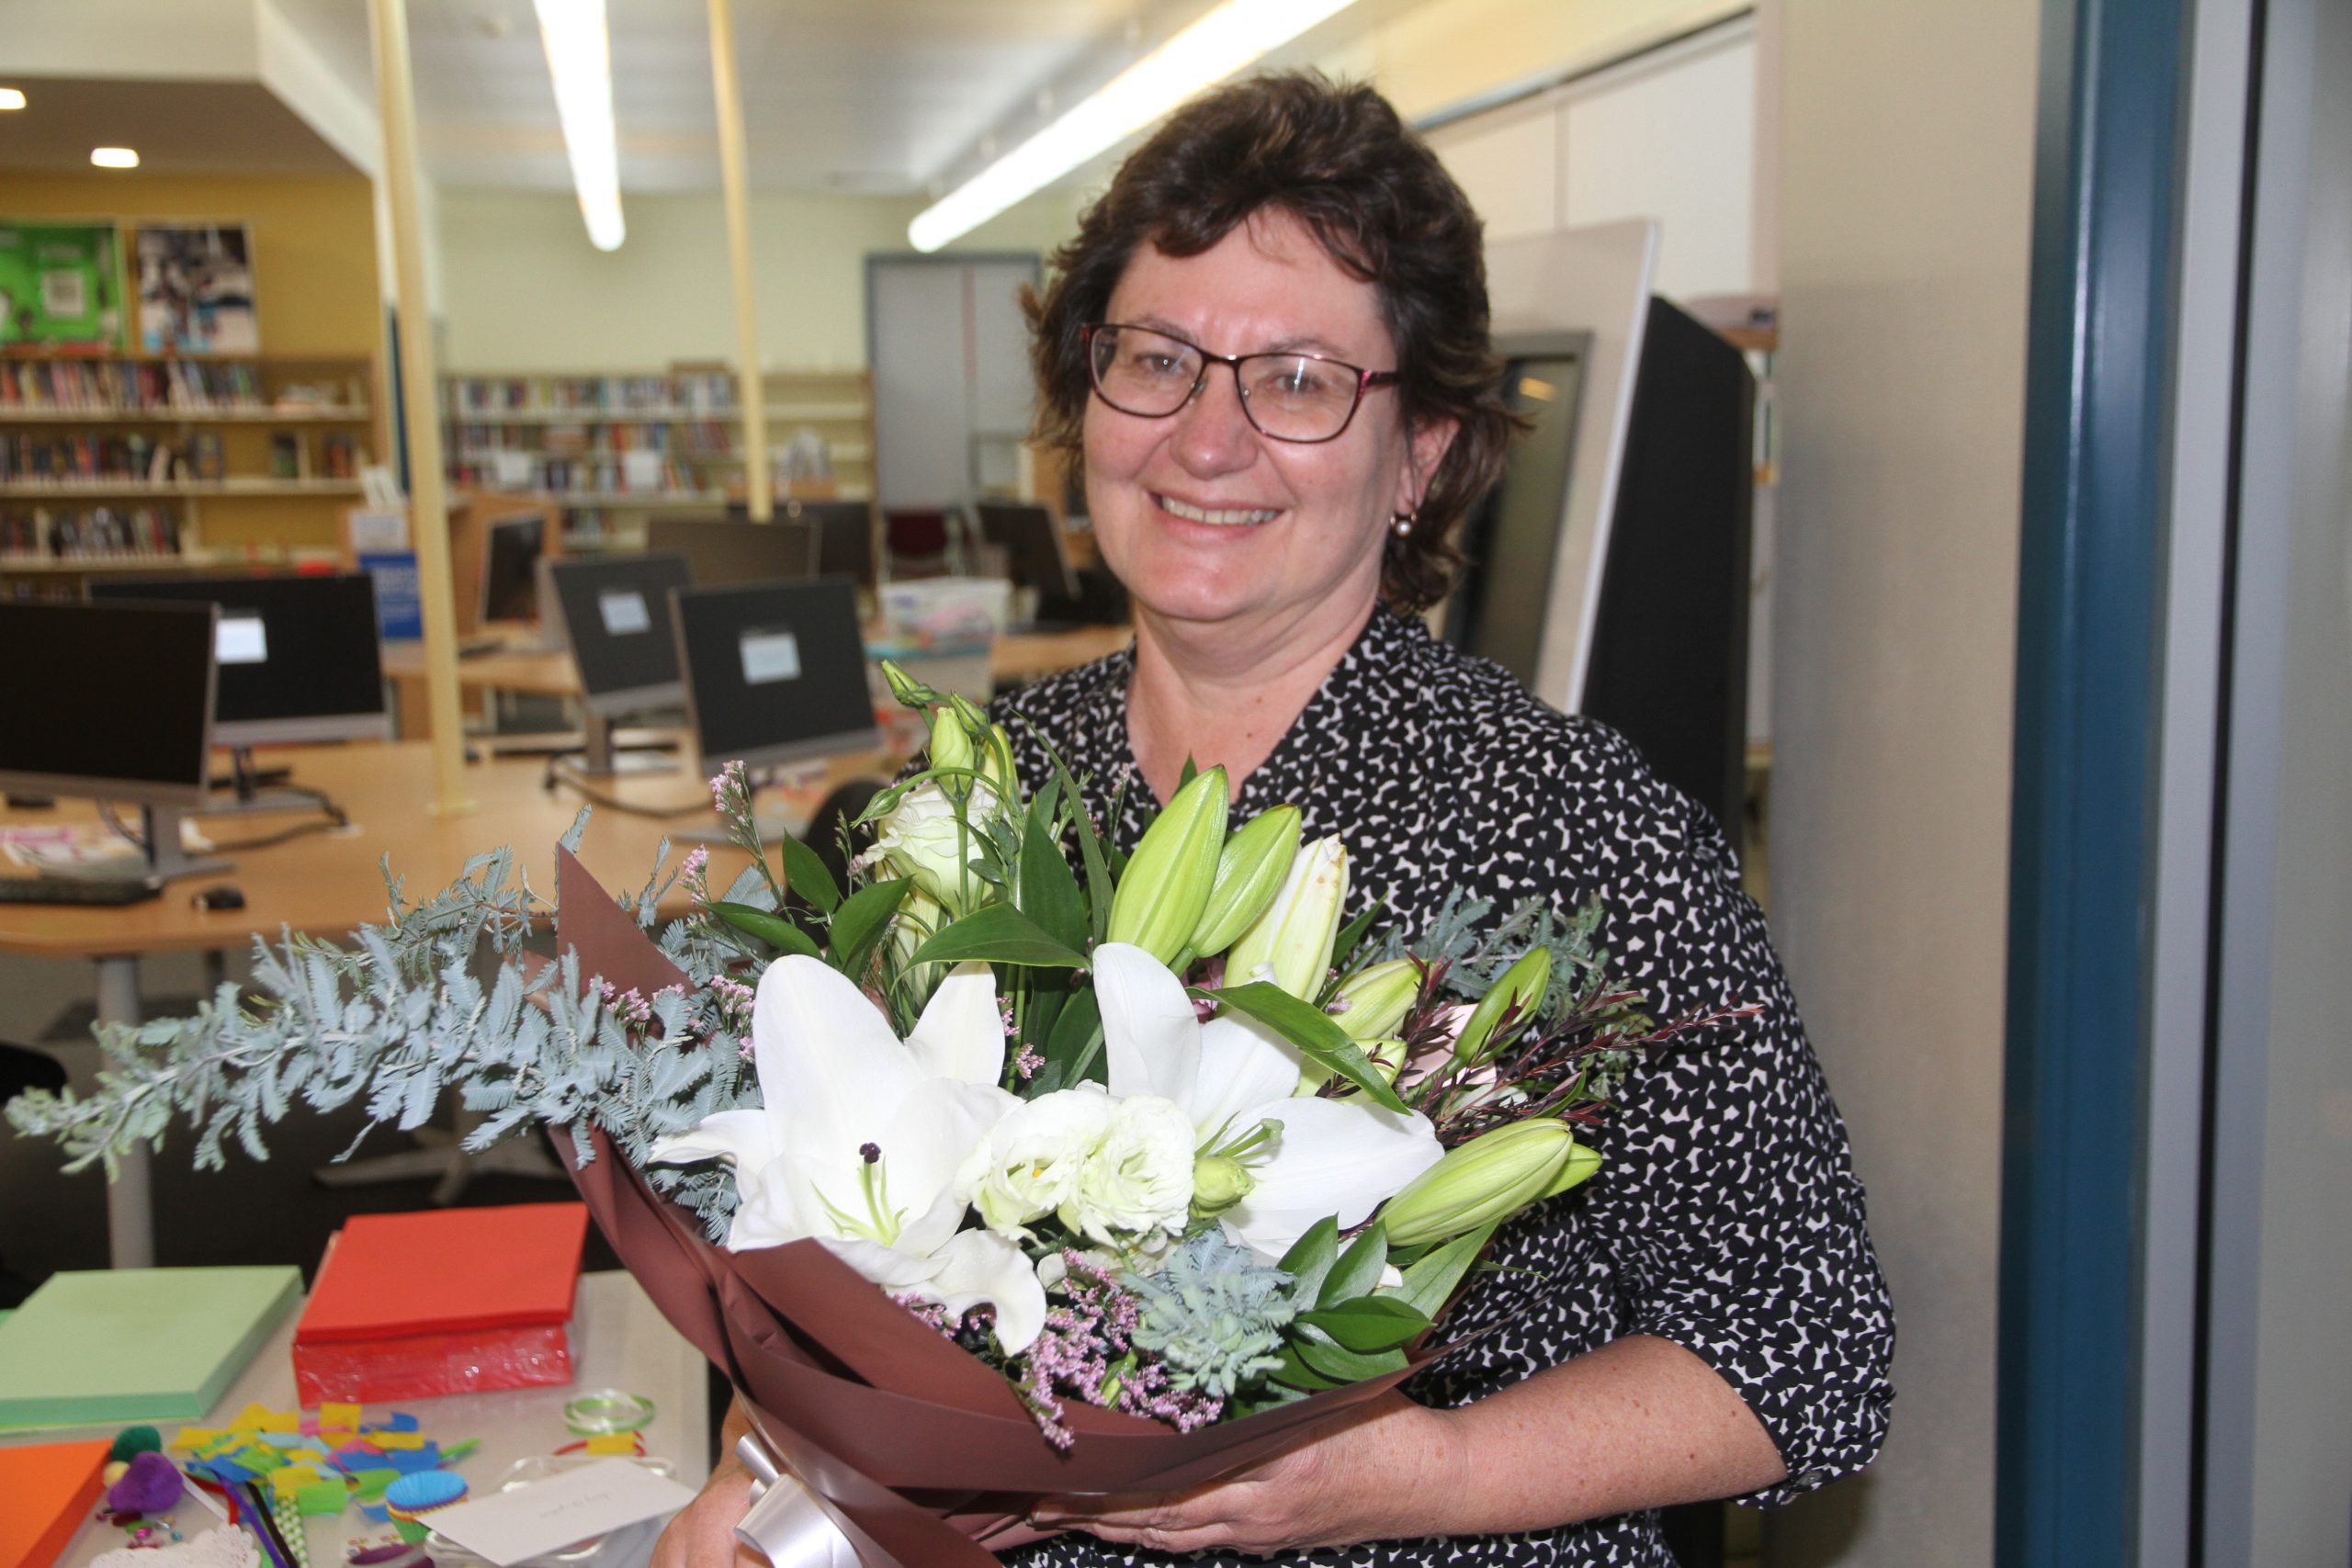 Jenny steps down after 18 years as library manager